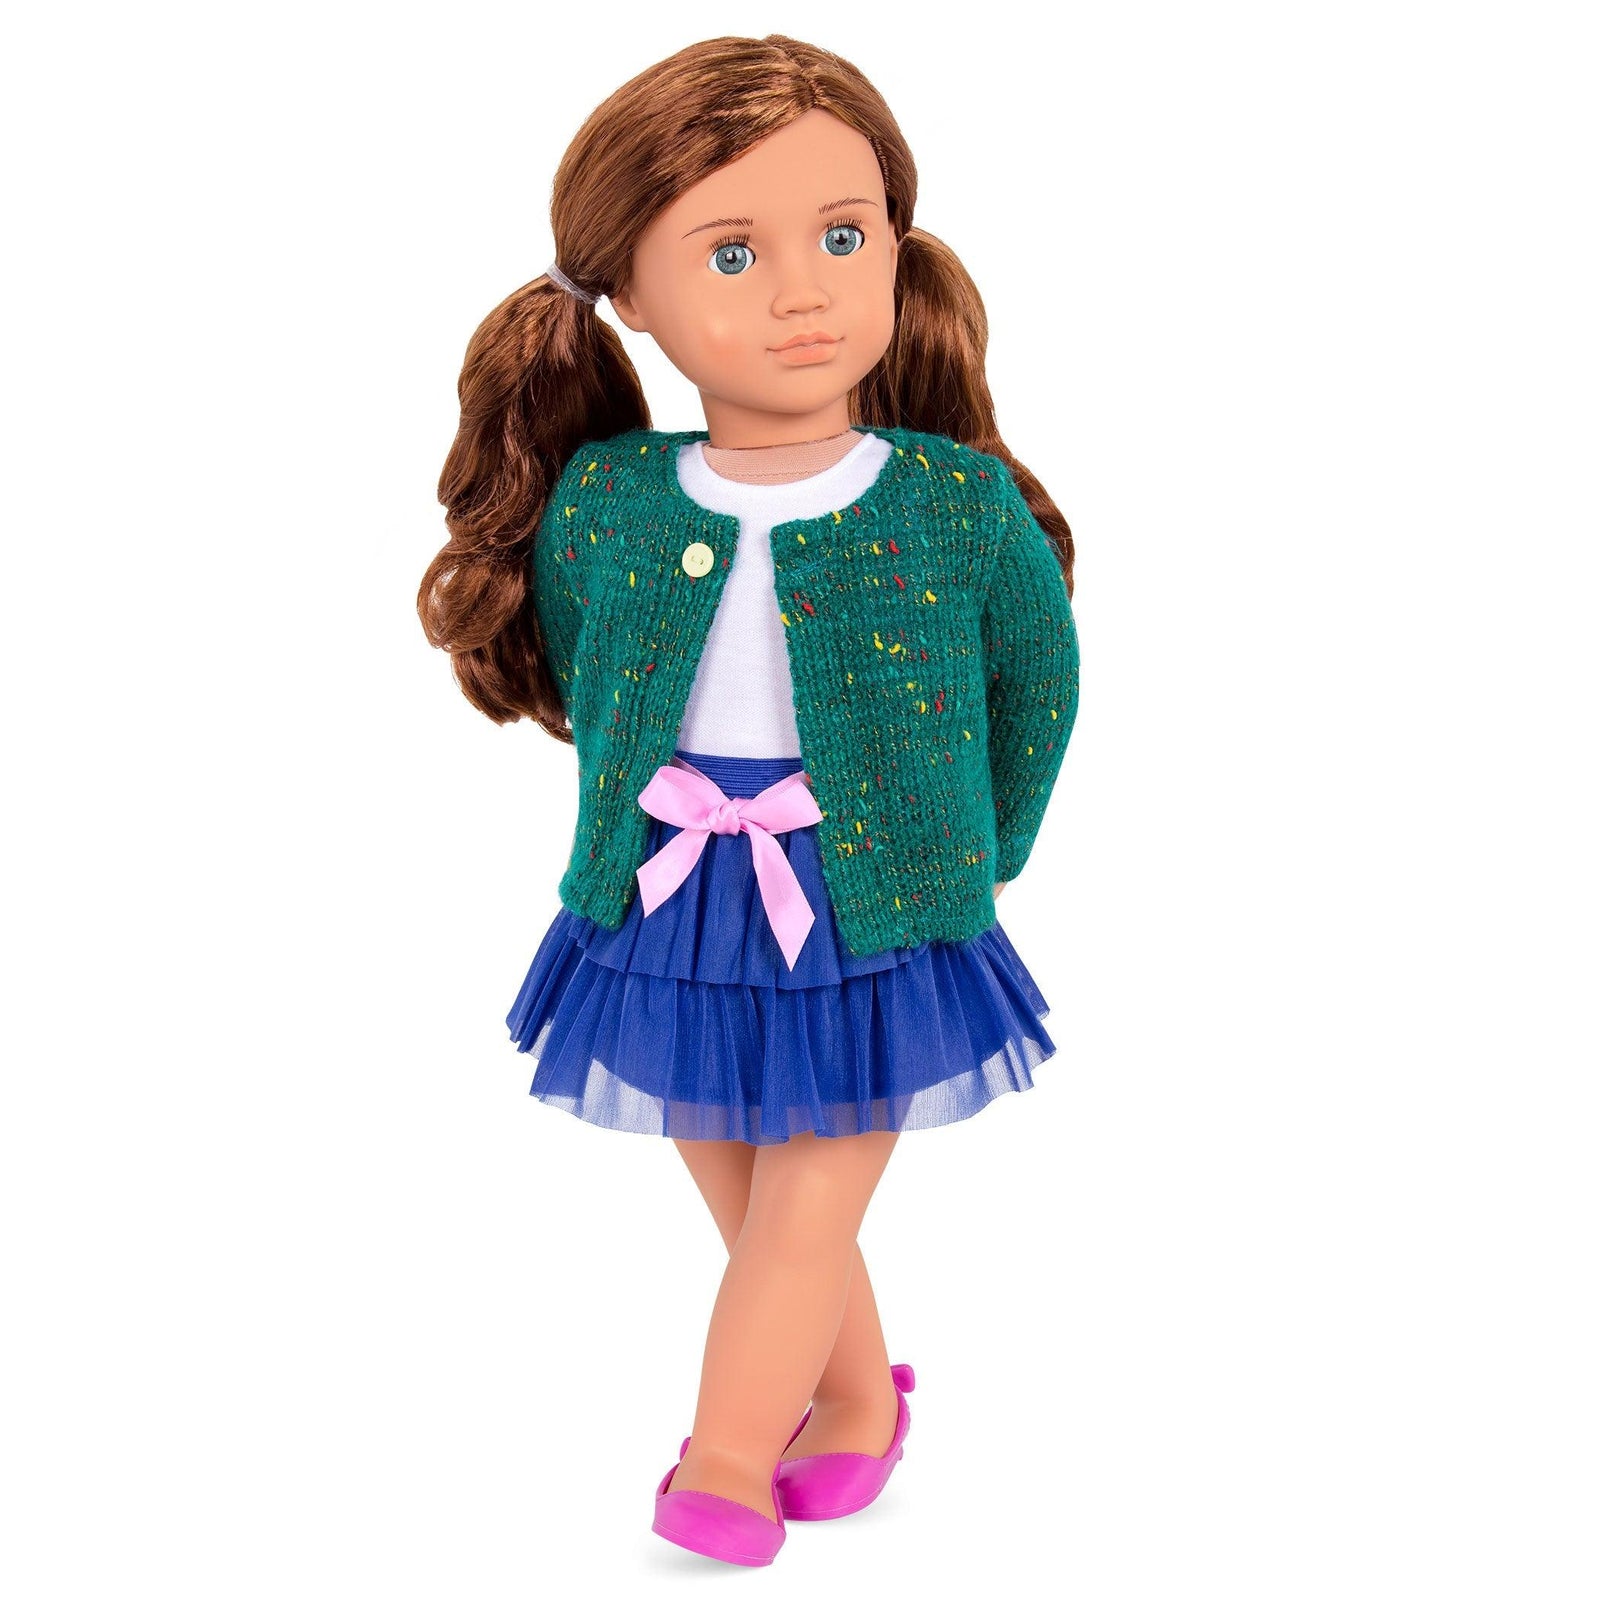 Our Generation: Dress with sapphire skirt with frills for Bright and Brisk doll